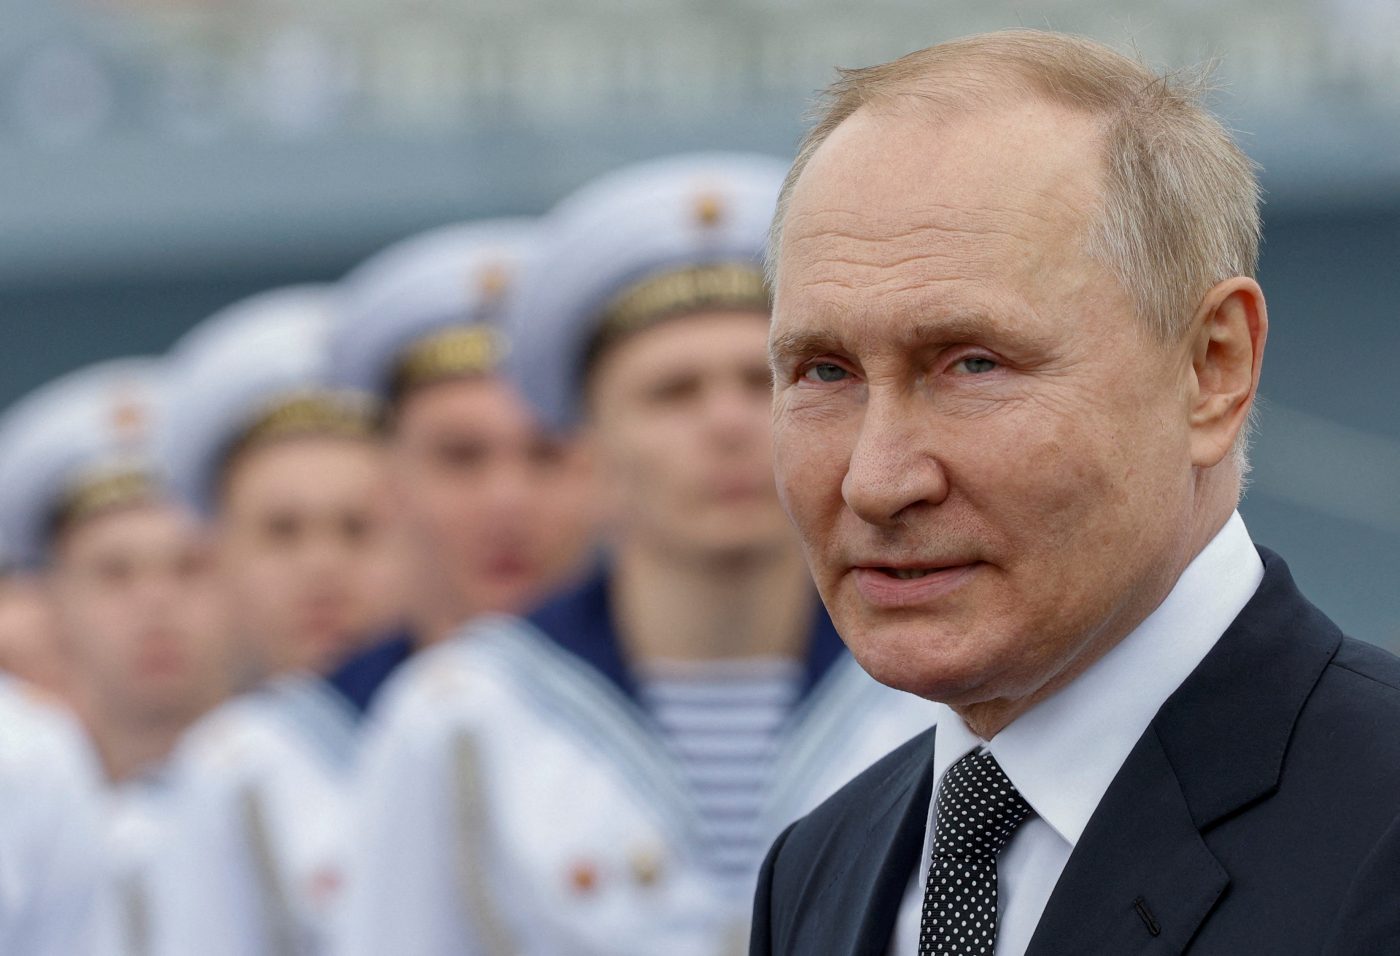 Photo: Russia's President Vladimir Putin attends a parade marking Navy Day in Saint Petersburg, Russia July 31, 2022. Credit: REUTERS/Maxim Shemetov